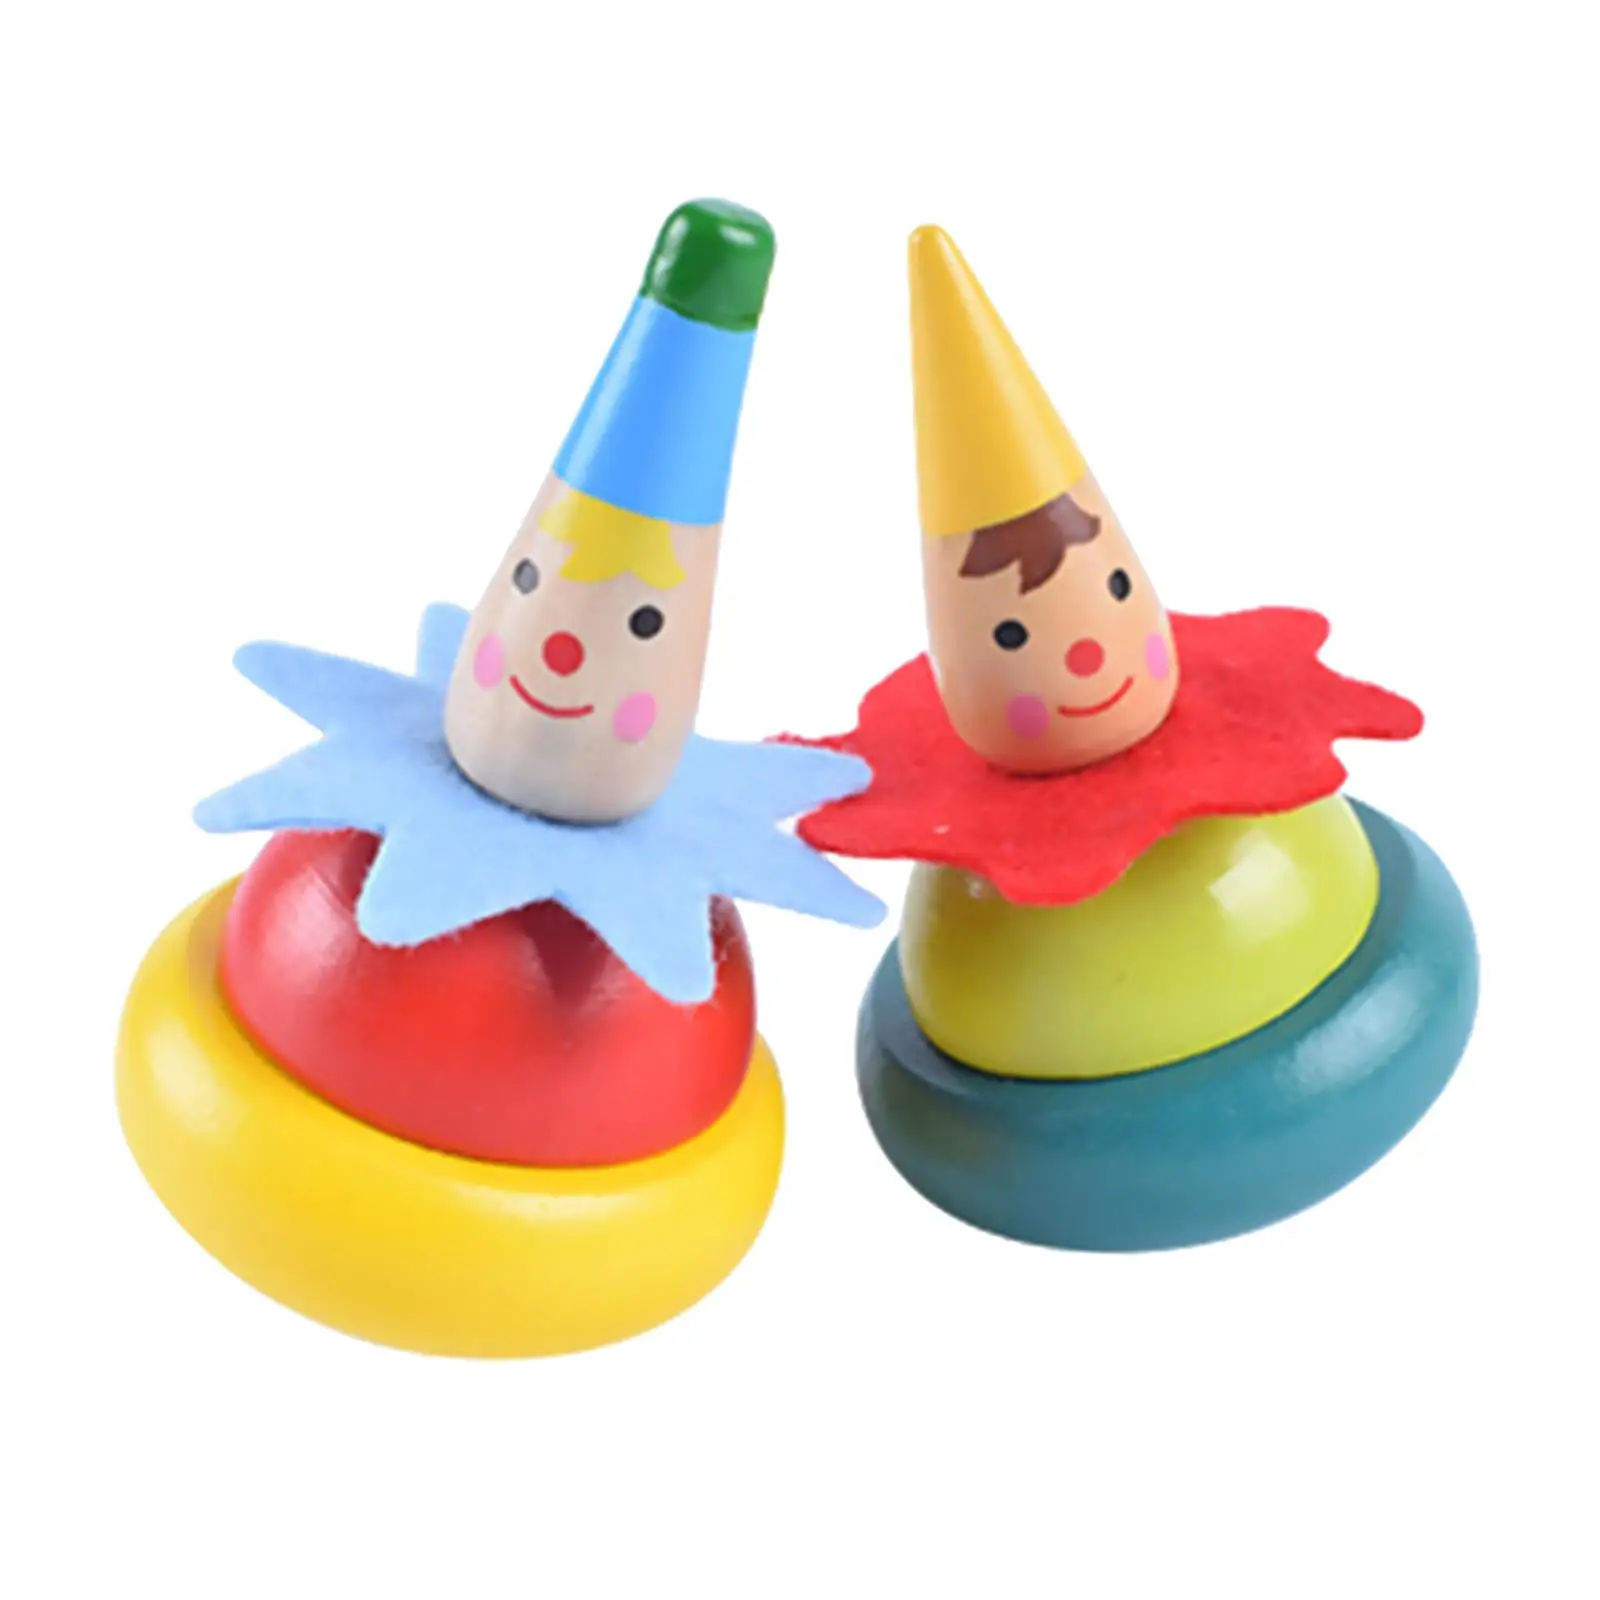 Wooden Whirling Toy Preschool Game Clown Gyro Toy Battling Tops for Children